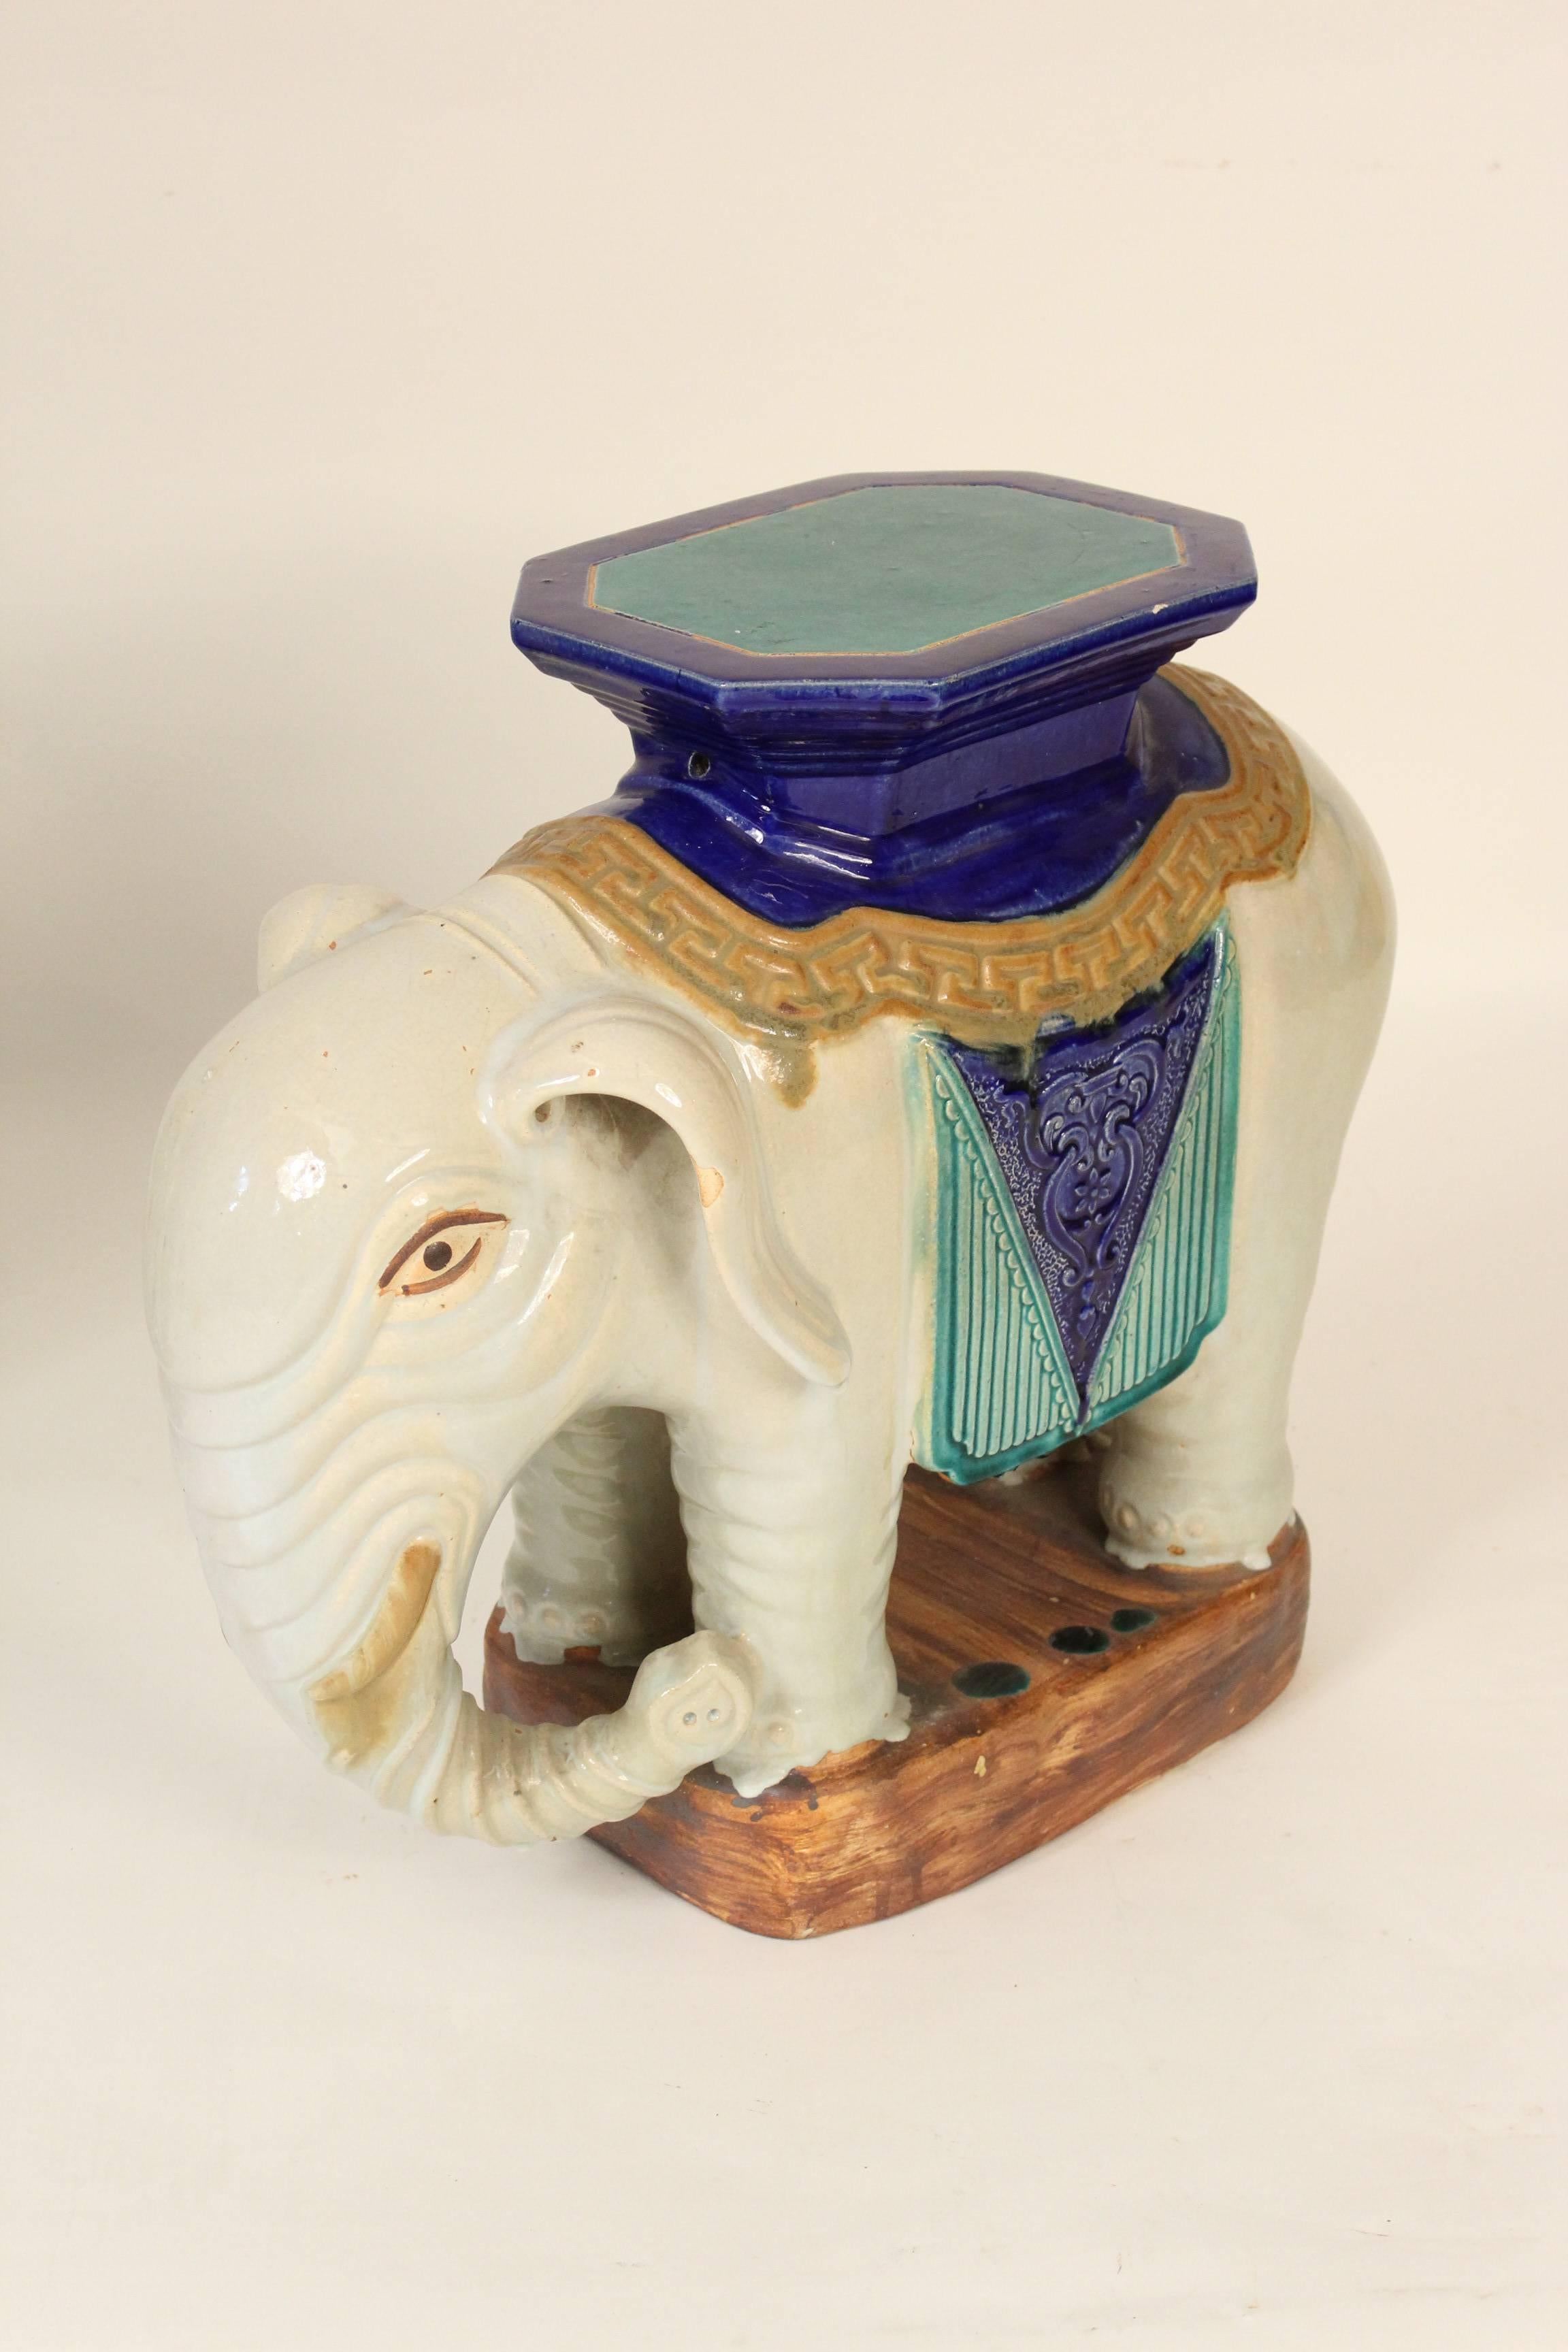 Pair of Chinese stoneware polychrome decorated elephant form occasional tables, circa 1990. These elephant tables are a very fun colorful pair of tables that could be used either indoors or outdoors. The table tops measures 11.5